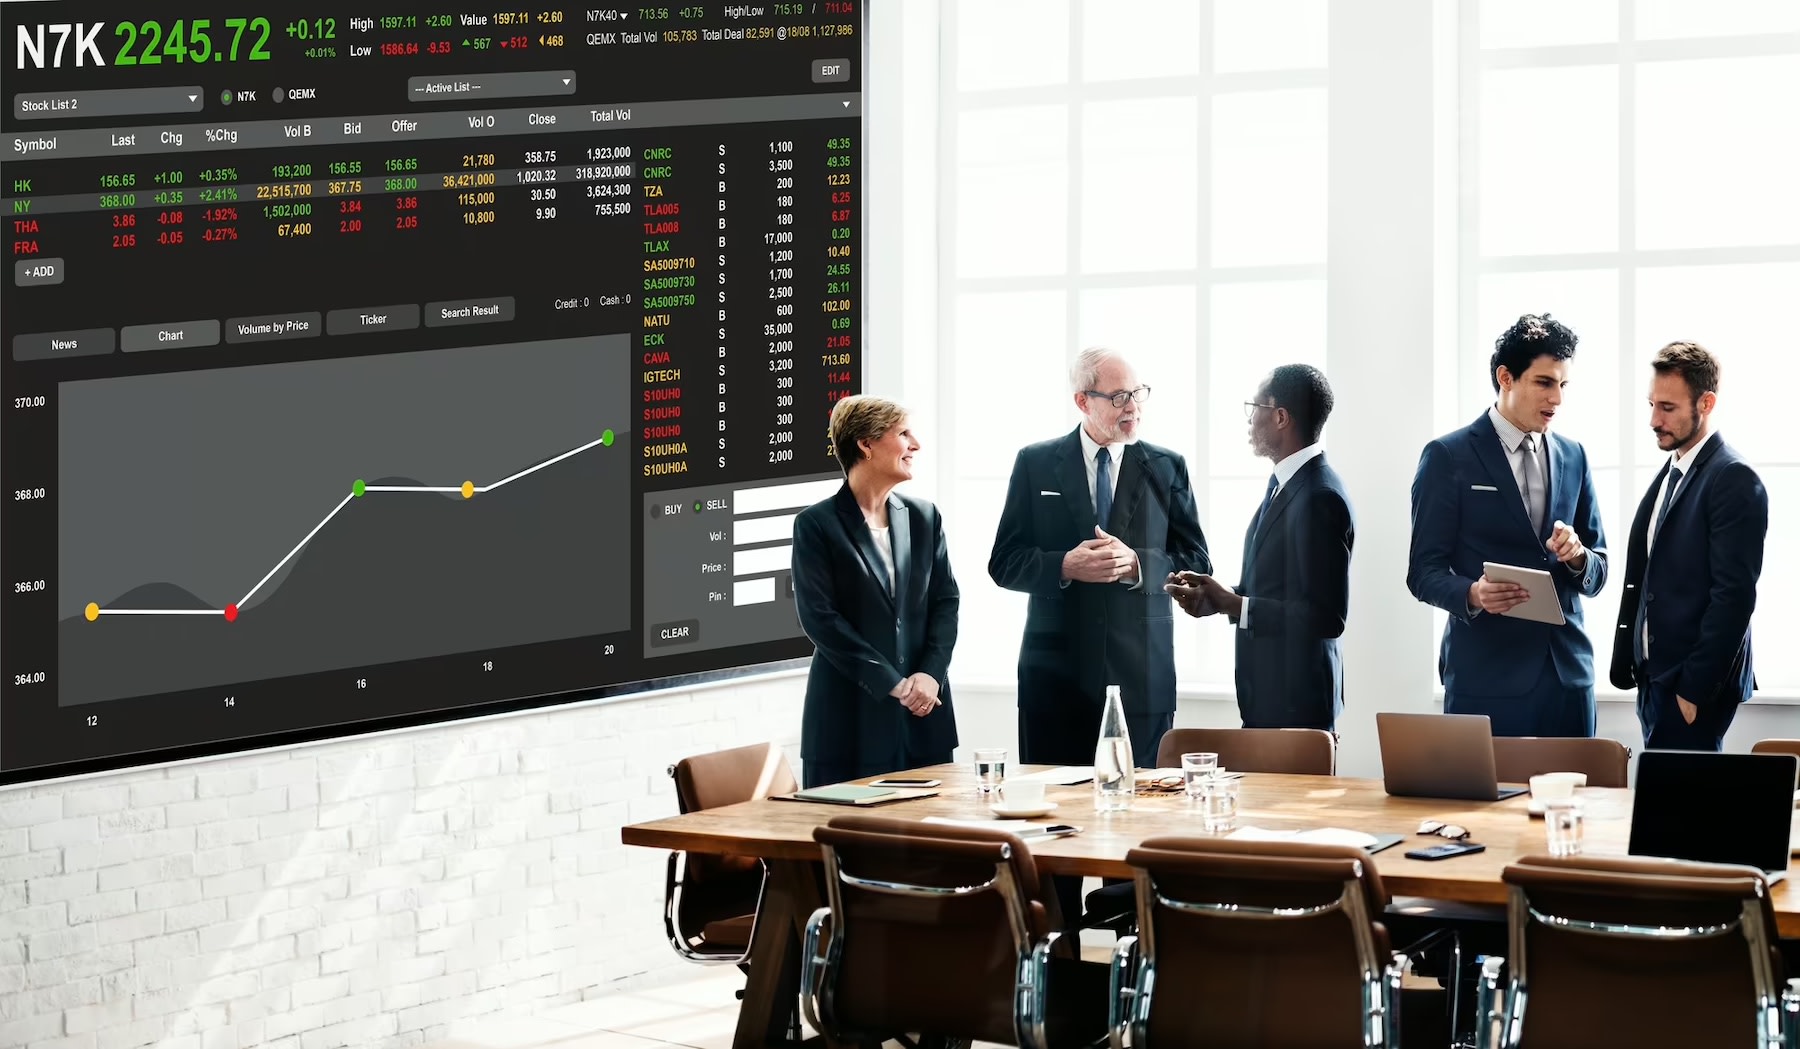 Image of executives in discussion in front of screen displaying stock performance